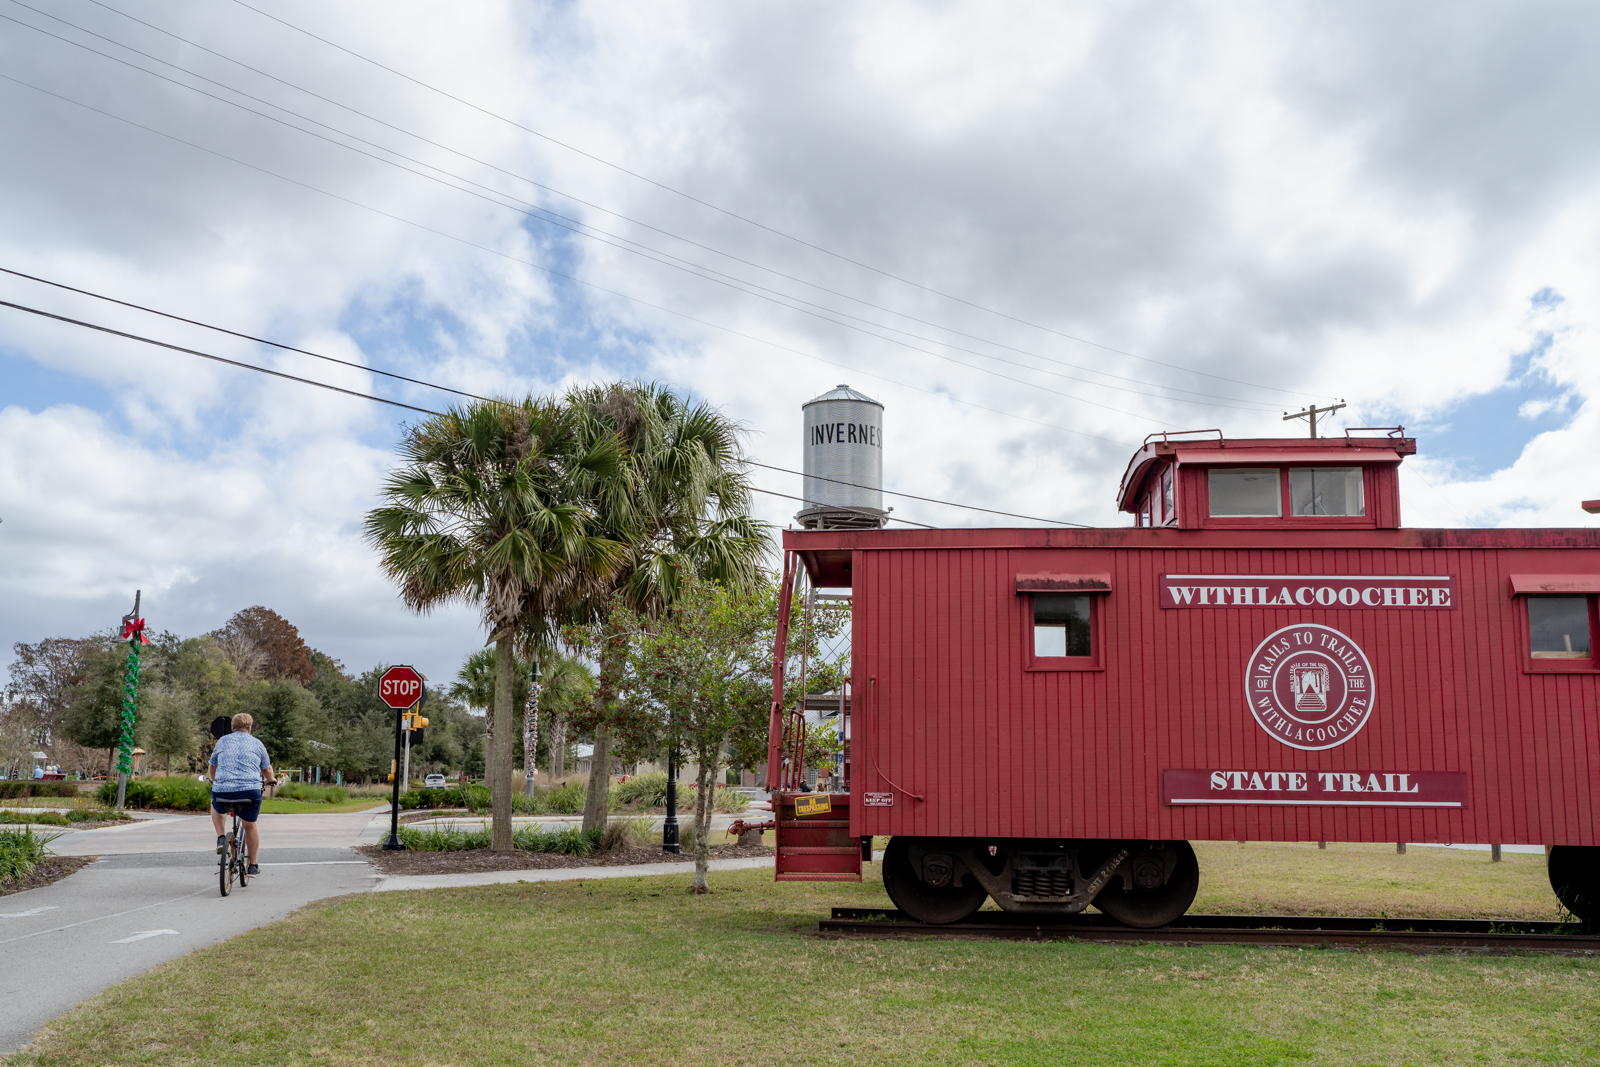 The Withlacoochee State Trail caboose is parked on the right hand side of the photo. A cyclist on the trail comes to a stop. In the background is a water tank with Inverness written on it.